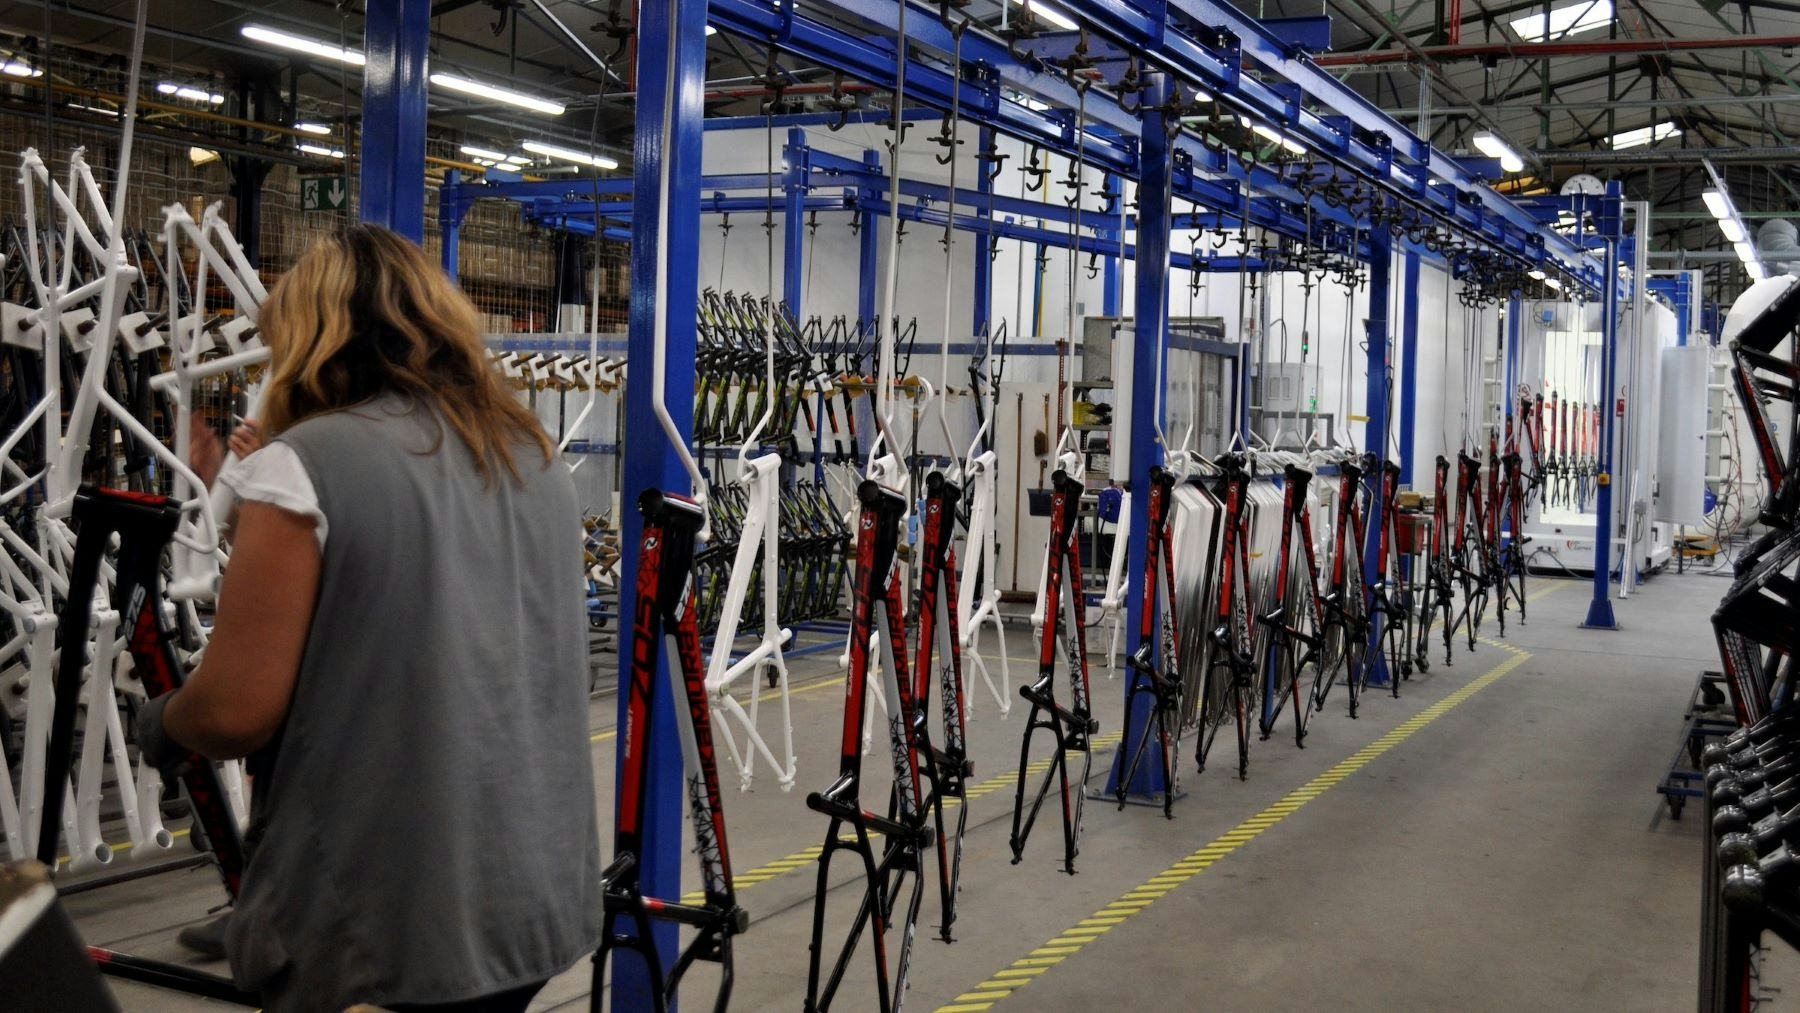 The 2023-30 plan set by the French government targets a production of 2 million units by 2030. 854,000 bicycles were assembled in French factories in 2022. – Photo MFC